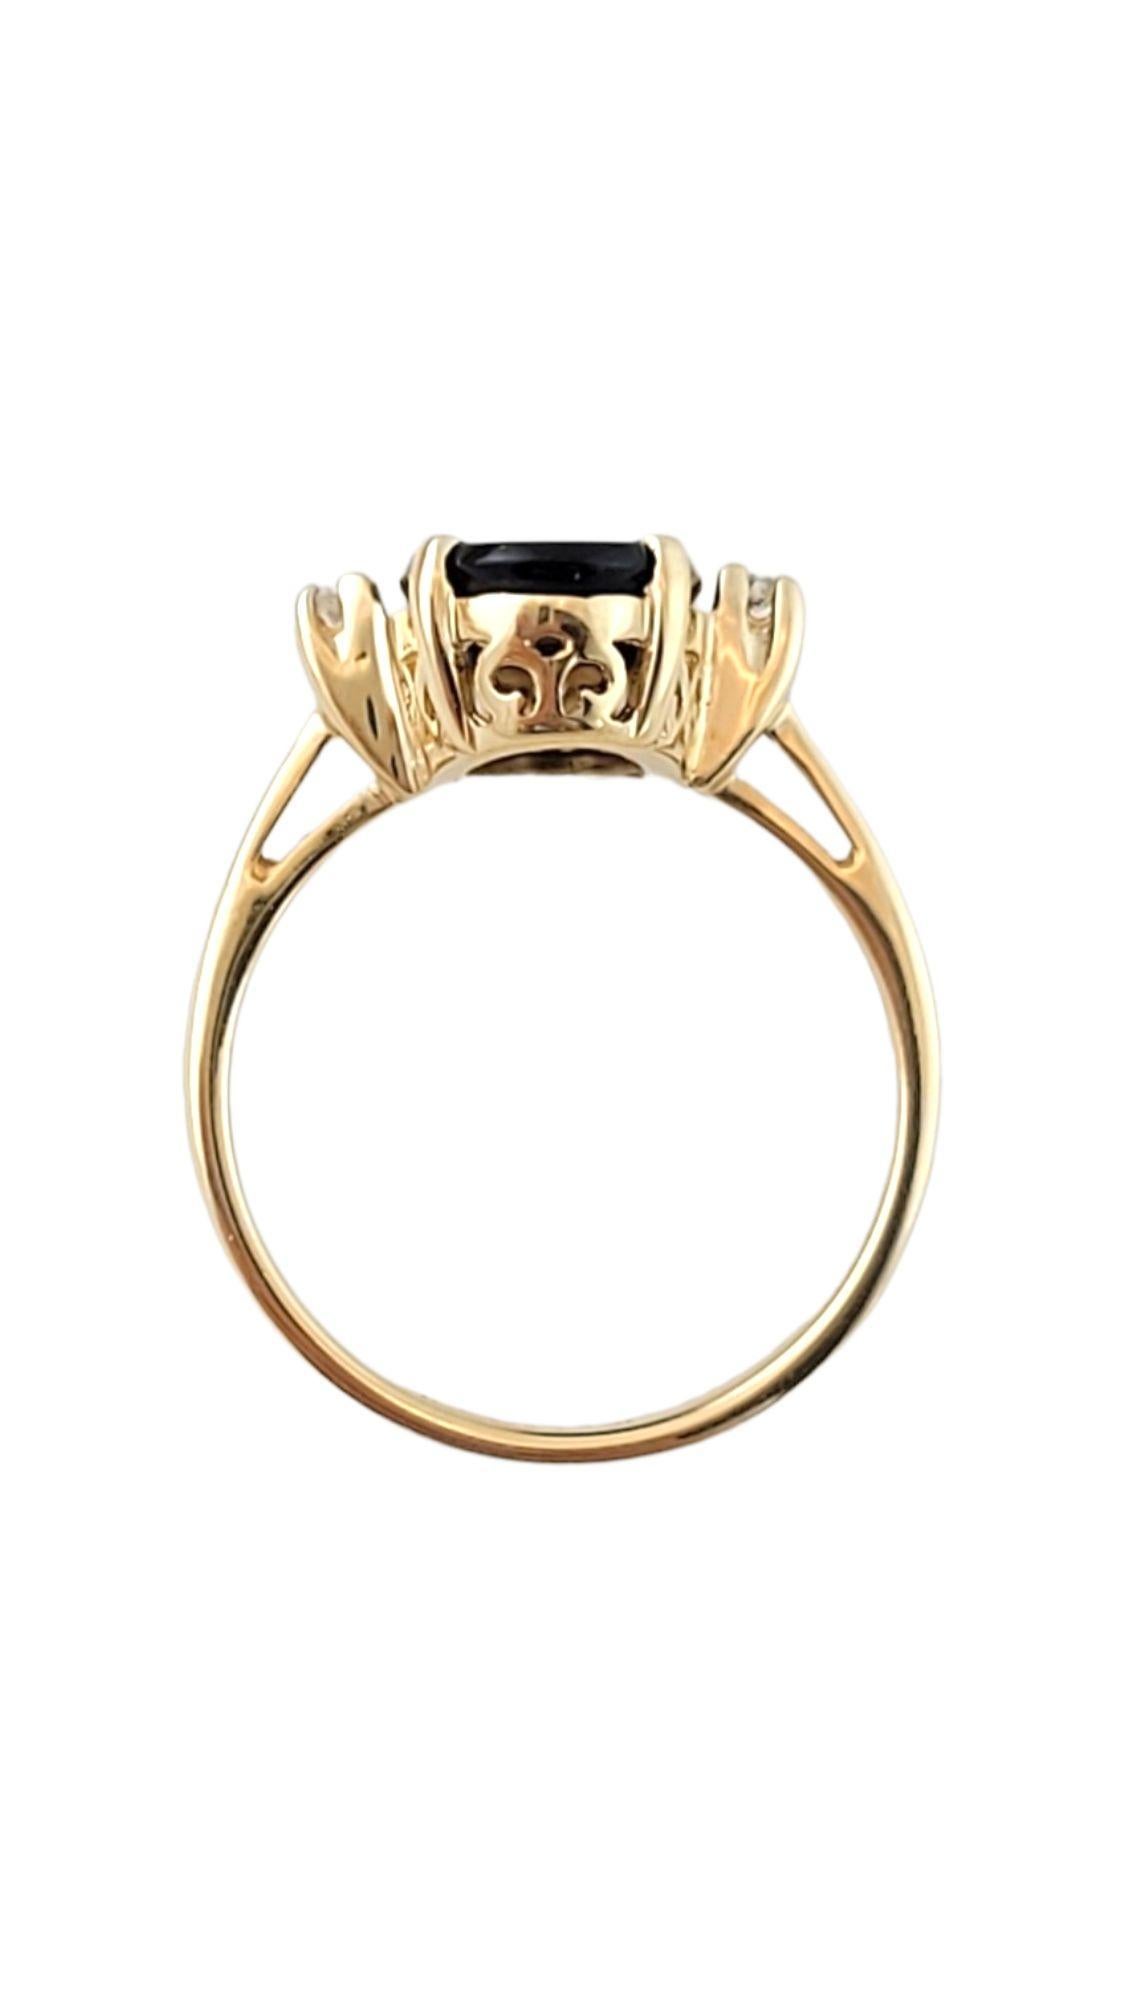  14K Yellow Gold Onyx and Diamond Ring Size 6.5-6.75 #14990 In Good Condition For Sale In Washington Depot, CT